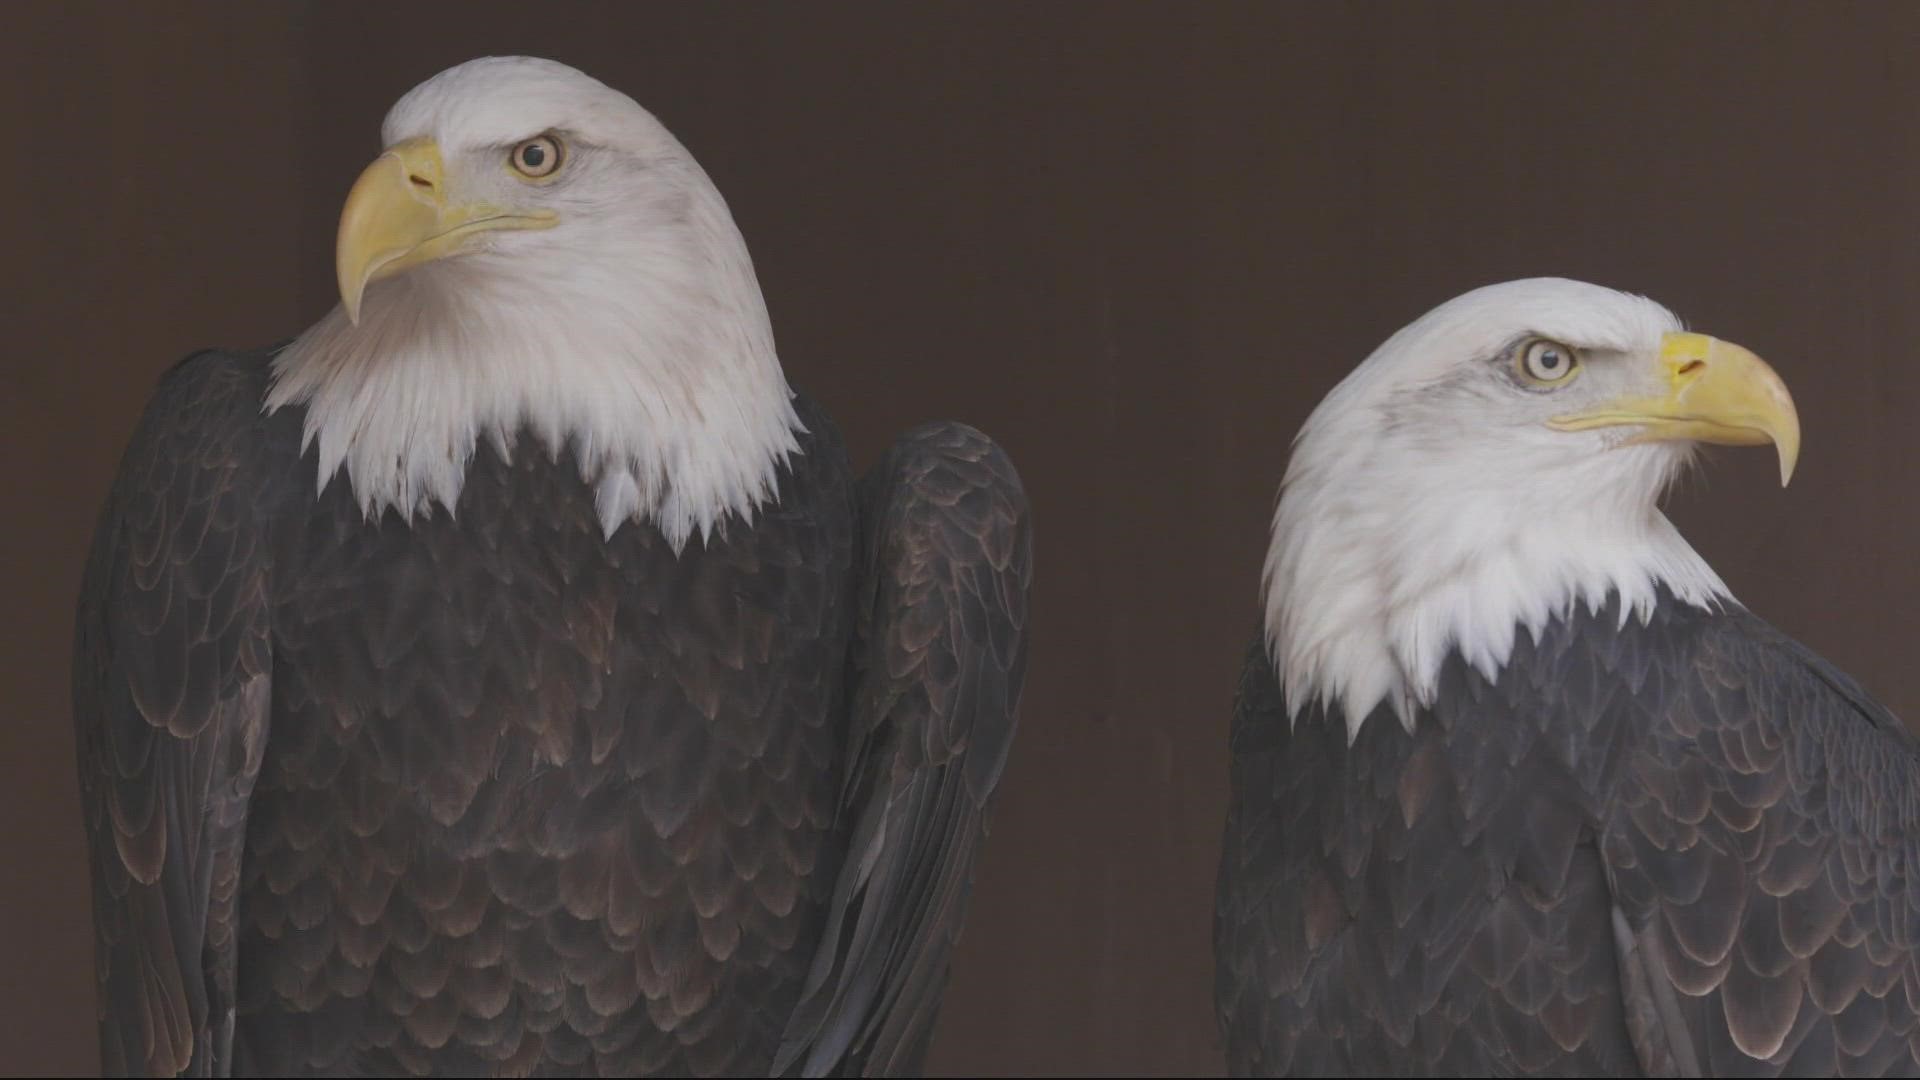 Since 2011, bald eagles have showing up in ever larger numbers at The Dalles Dam each winter.